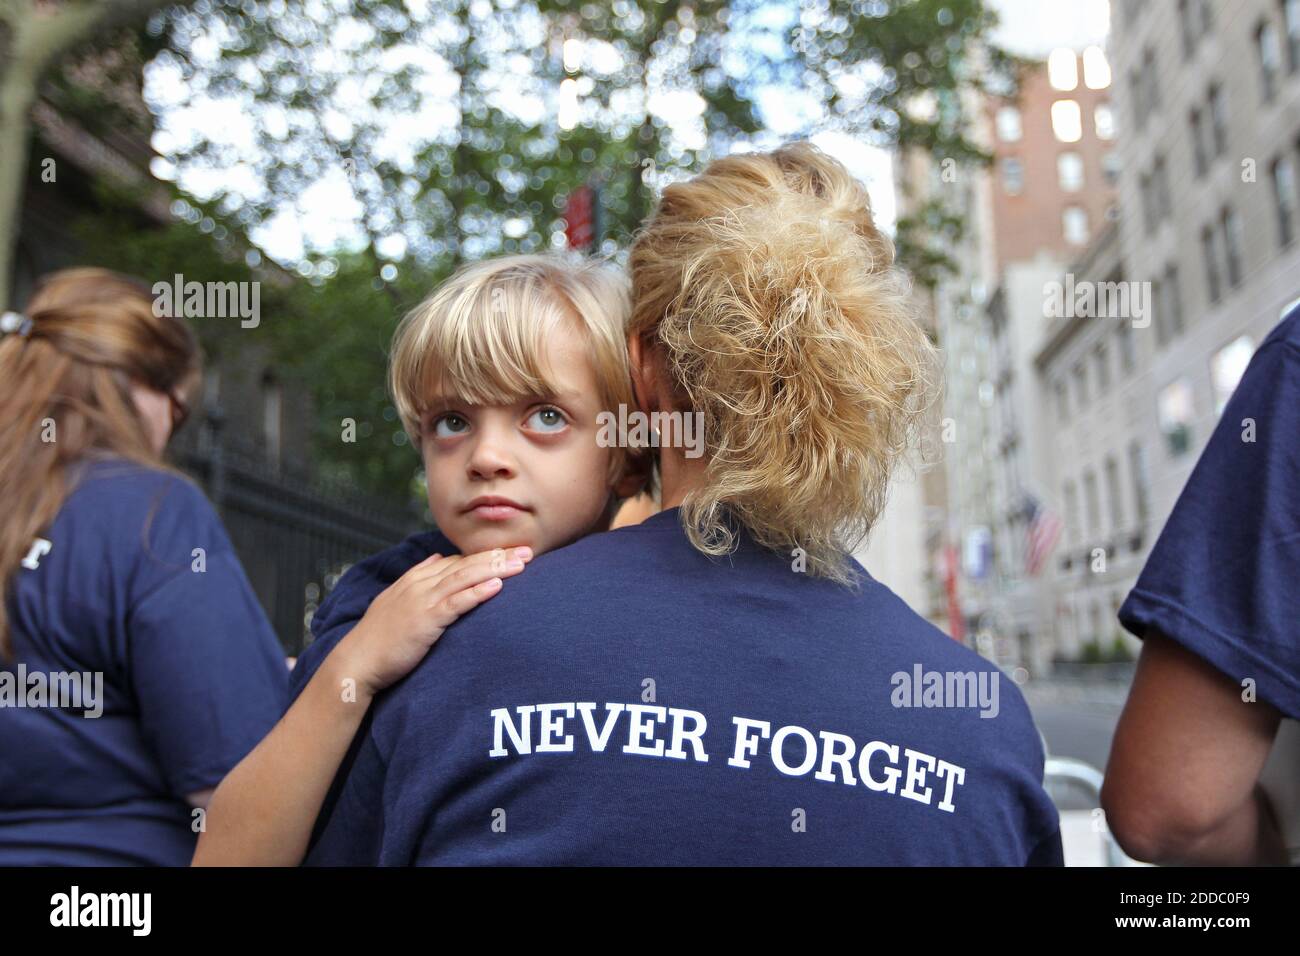 NO FILM, NO VIDEO, NO TV, NO DOCUMENTARY - Sean Geyer, 4 1/2, takes in the crowd at Ground Zero as his mother, Lorie Geyer, holds him close as they face Freedom Tower in New York City, Sunday, September 11, 2011, as the bells sound to mark the first plane crashing into the towers ten years ago. Photo by Michael Bryant/Philadelphia Inquirer/MCT/ABACAPRESS.COM Stock Photo